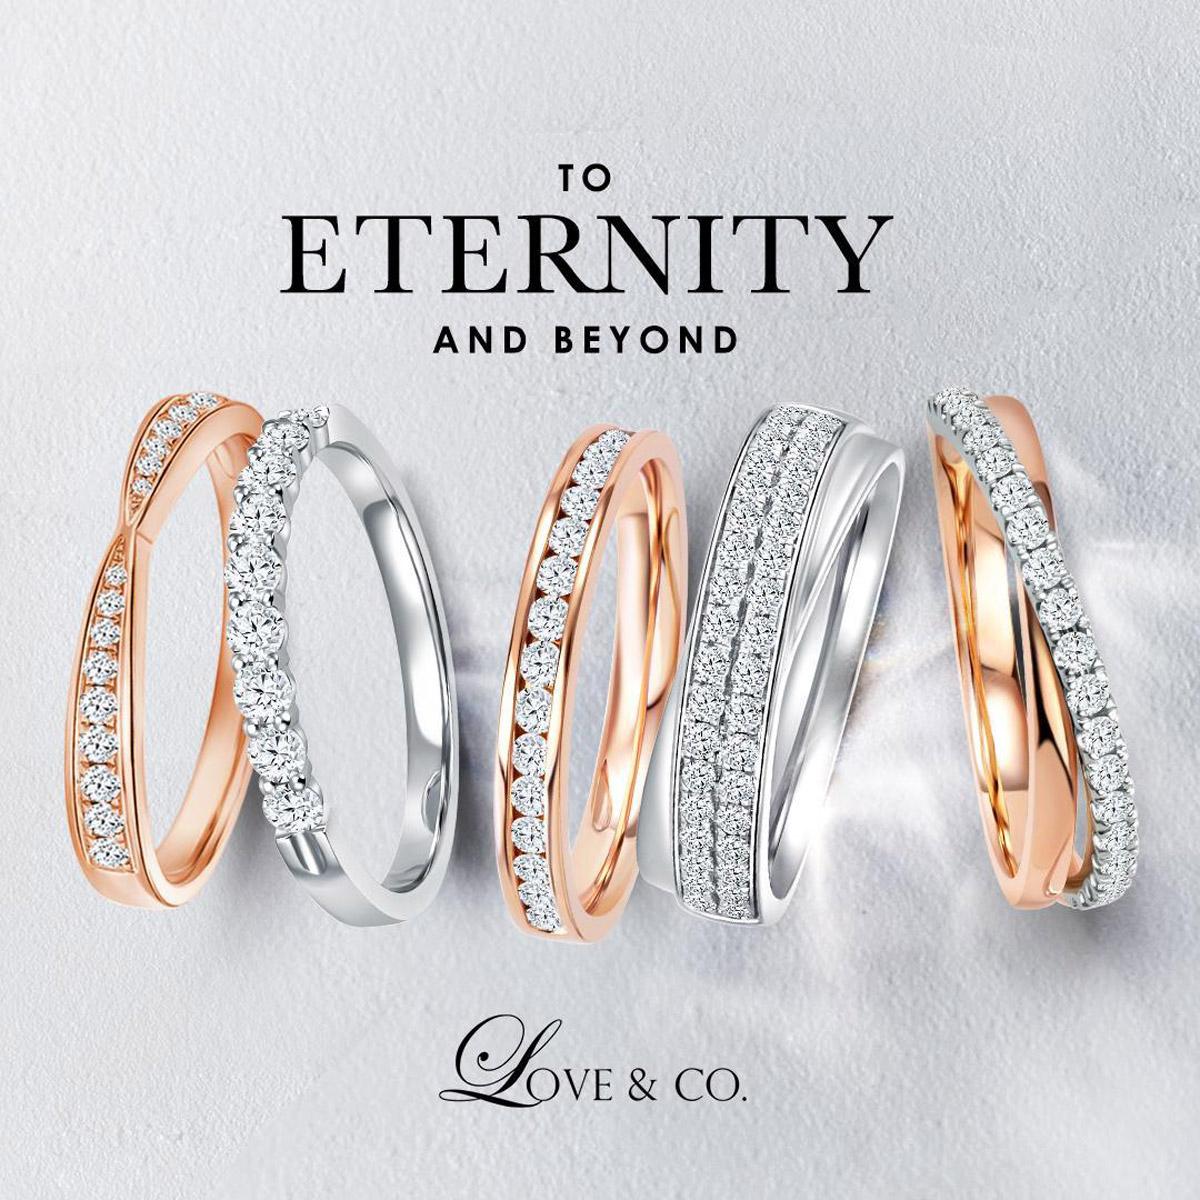 Revel in the Most Popular Styles and Signature Wedding Ring Designs at Love & Co.